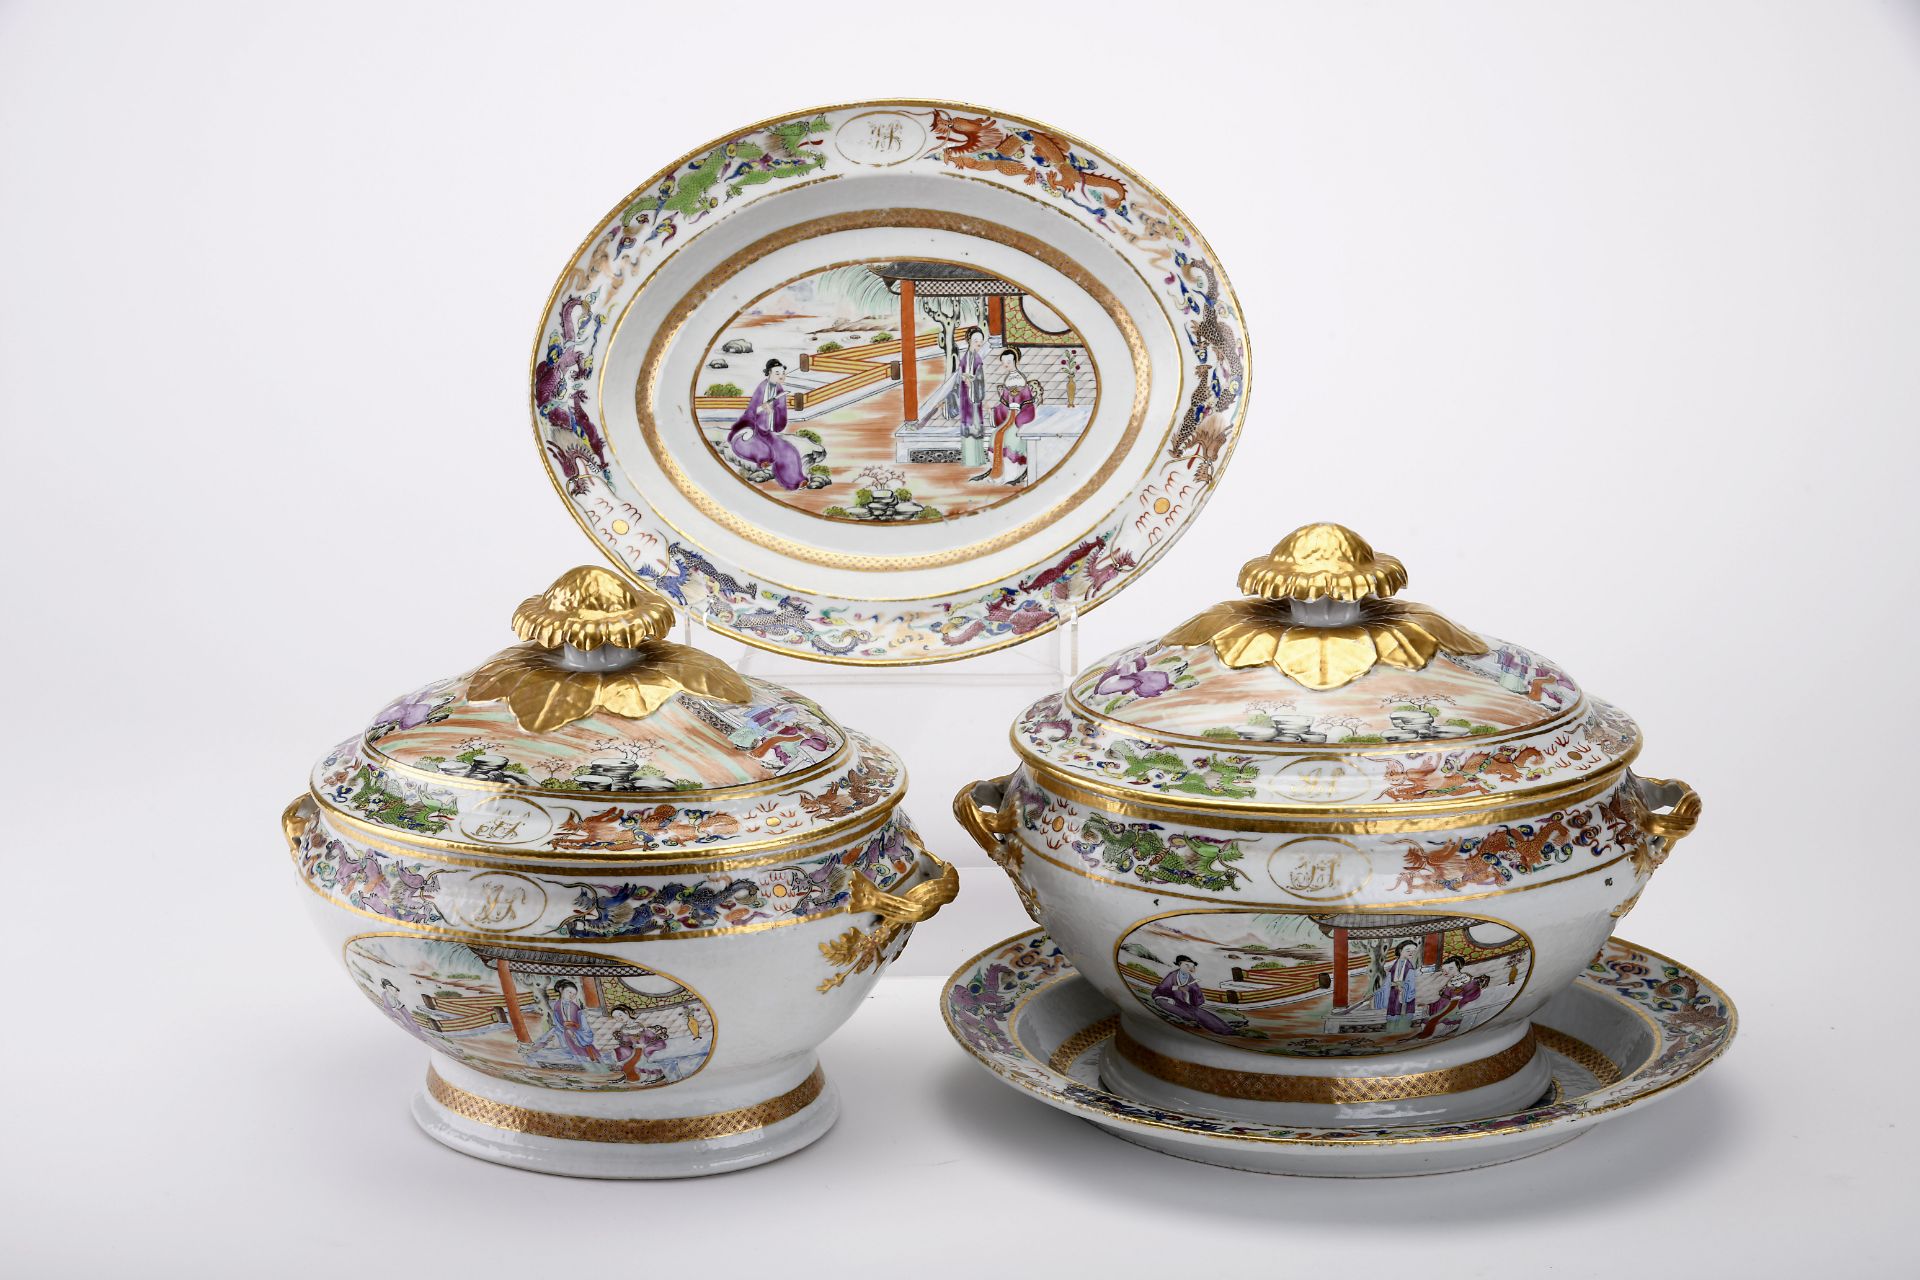 A pair of tureens with platter - Image 2 of 2